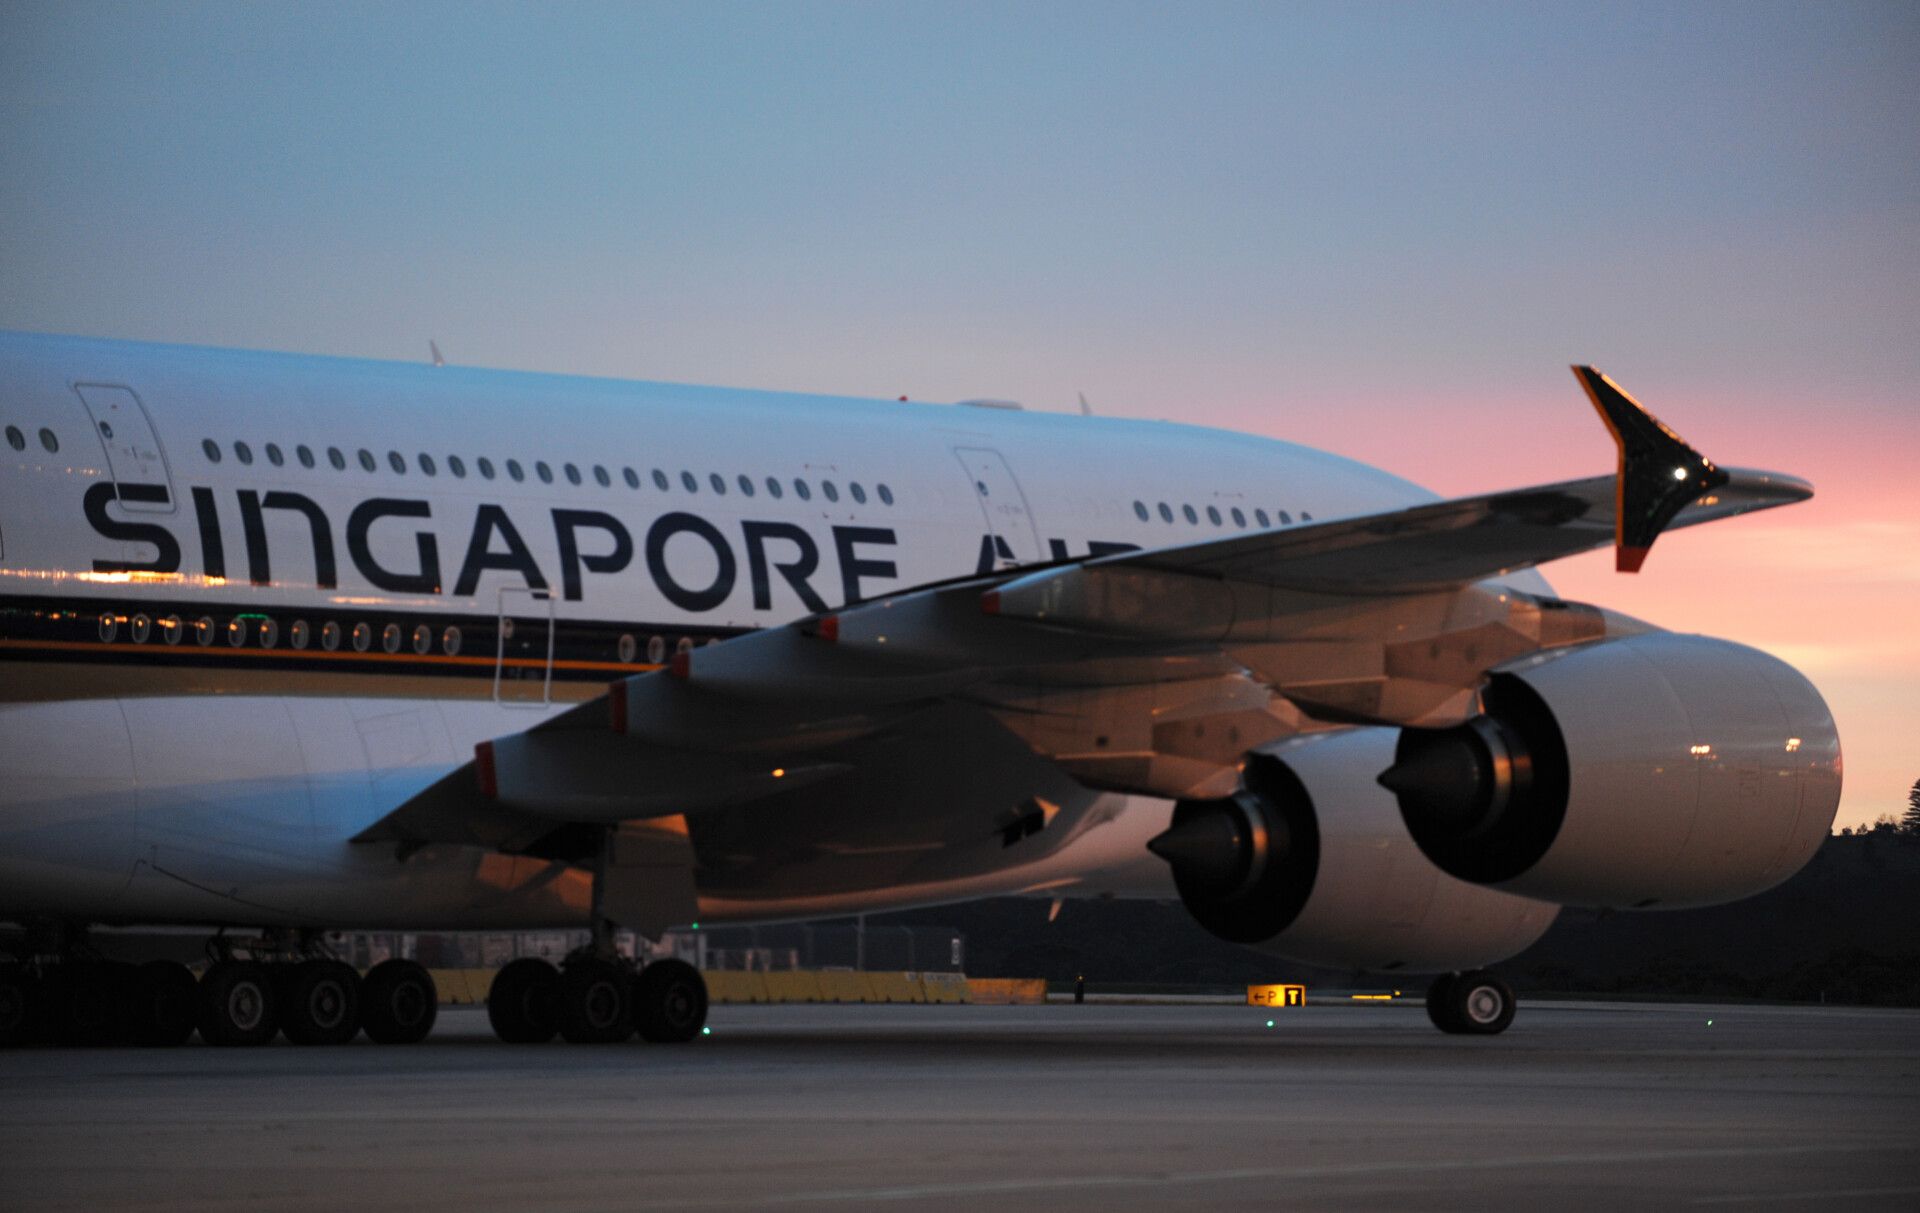 Singapore Airlines A380 Touches Down at Melbourne Airport